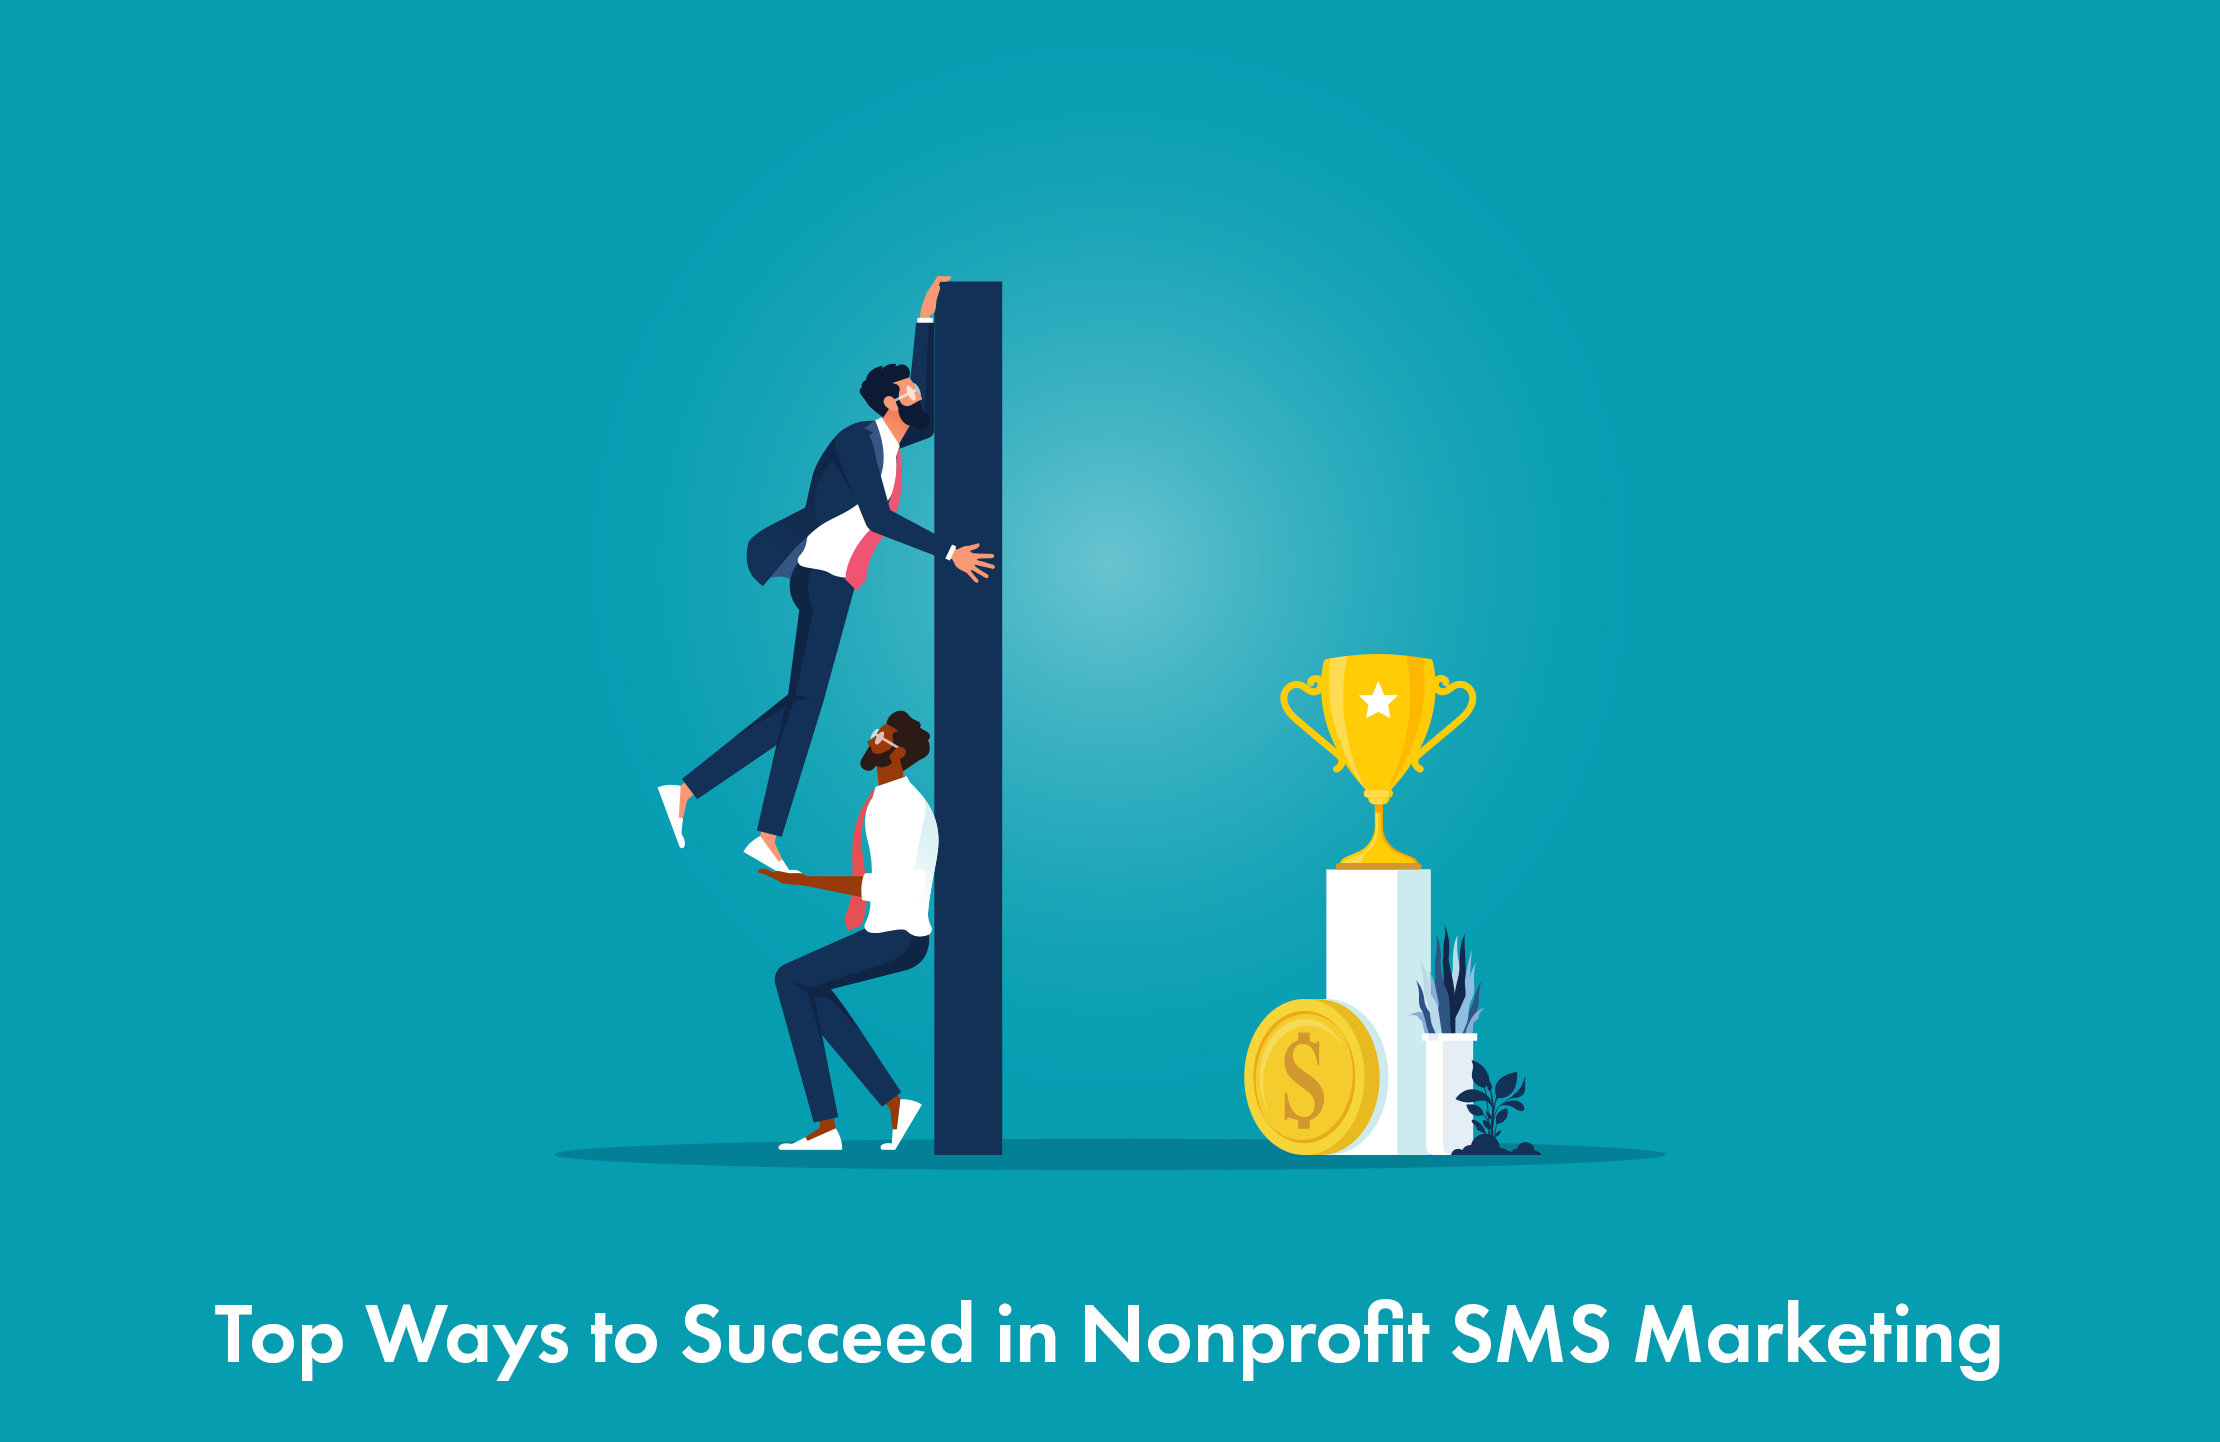 Top Ways To Succeed At Nonprofit SMS Marketing